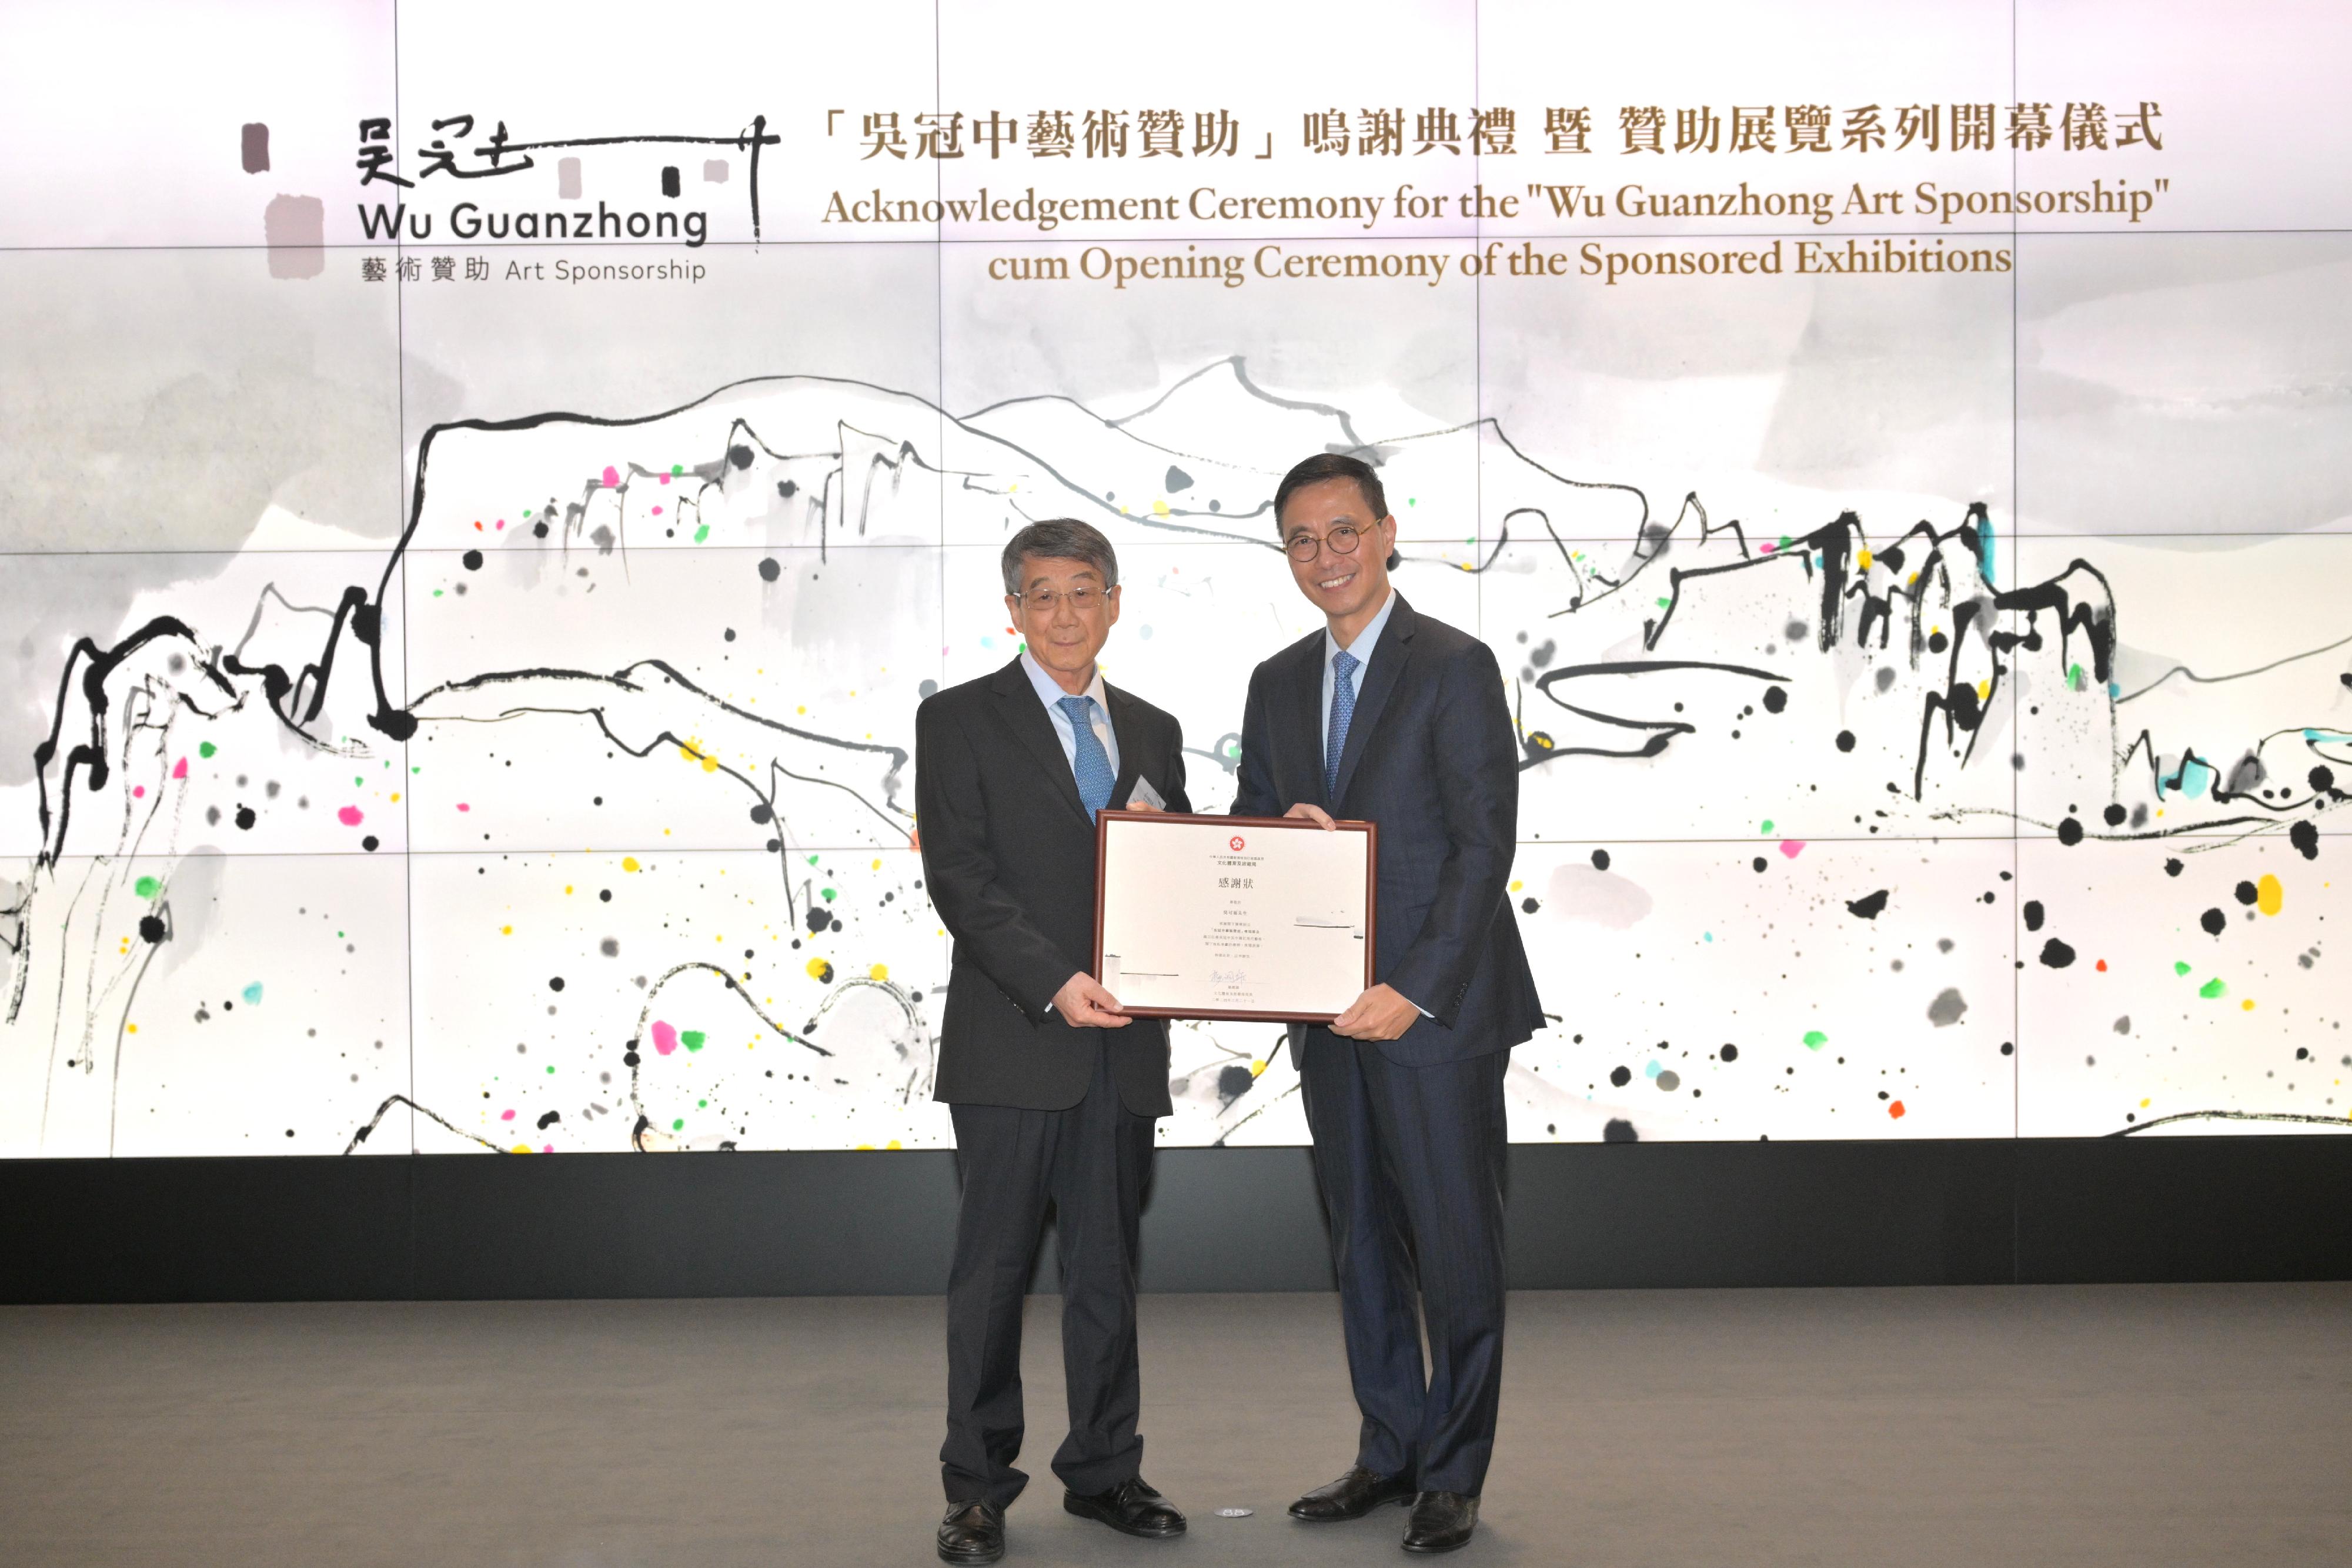 The acknowledgement ceremony for the Wu Guanzhong Art Sponsorship and opening ceremony of sponsored exhibitions was held today (March 21) at the Hong Kong Museum of Art. Picture shows the Secretary for Culture, Sports and Tourism, Mr Kevin Yeung (right), presenting a Certificate of Appreciation to the sponsor of the Wu Guanzhong Art Sponsorship, Mr Wu Keyu.